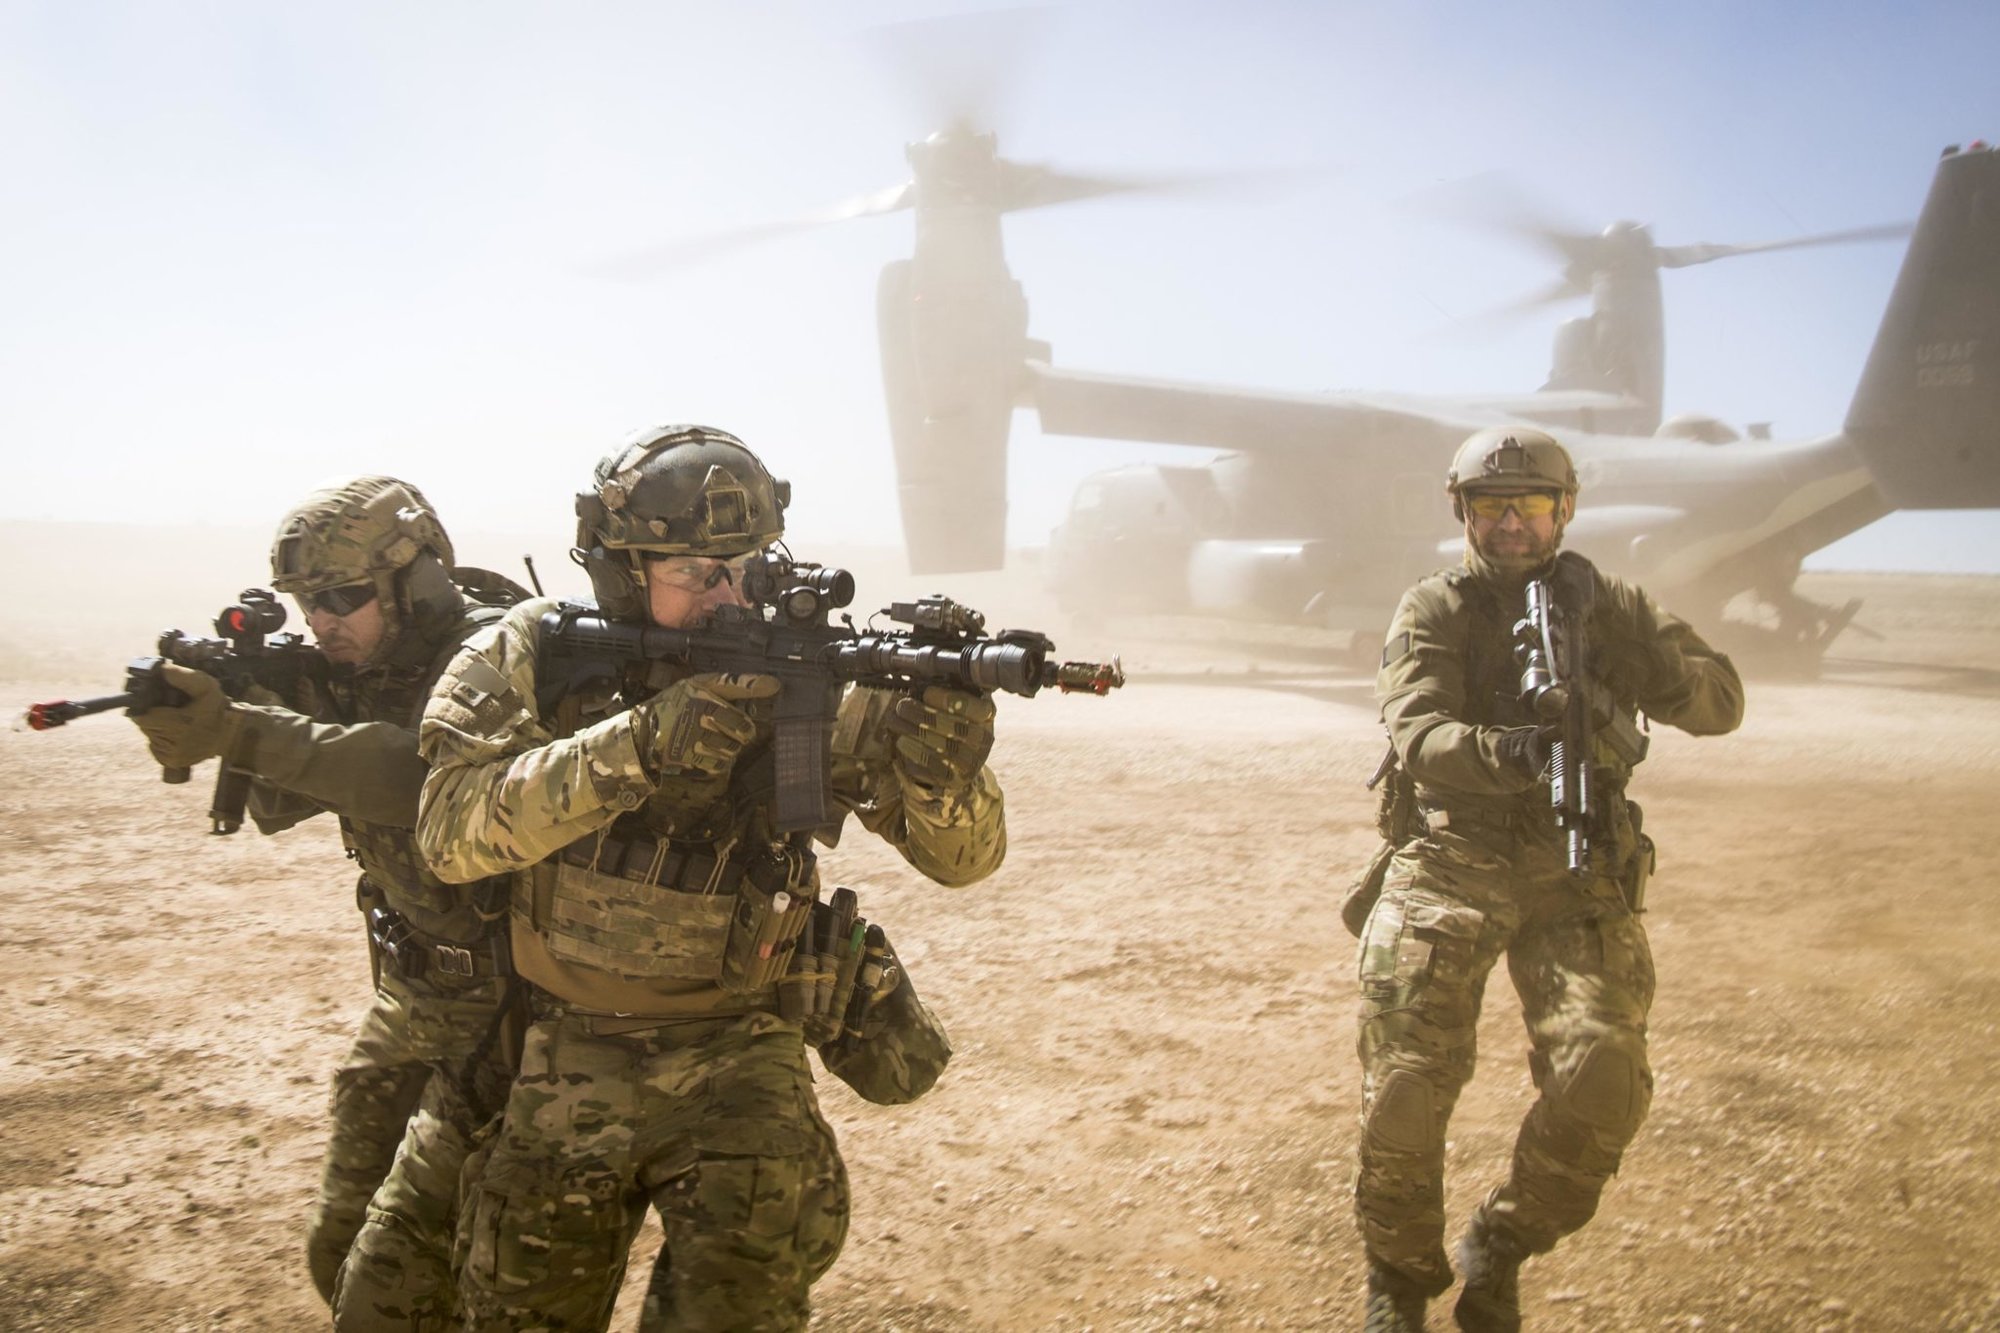 A joint special forces team move together out of a U.S. Air Force CV-22 Osprey Feb. 26, 2018, at Melrose Training Range, New Mexico. At Emerald Warrior, the largest joint and combined special operations exercise, U.S. Special Operations Command forces train to respond to various threats across the spectrum of conflict. (U.S. Air Force photo/Senior Airman Clayton Cupit)